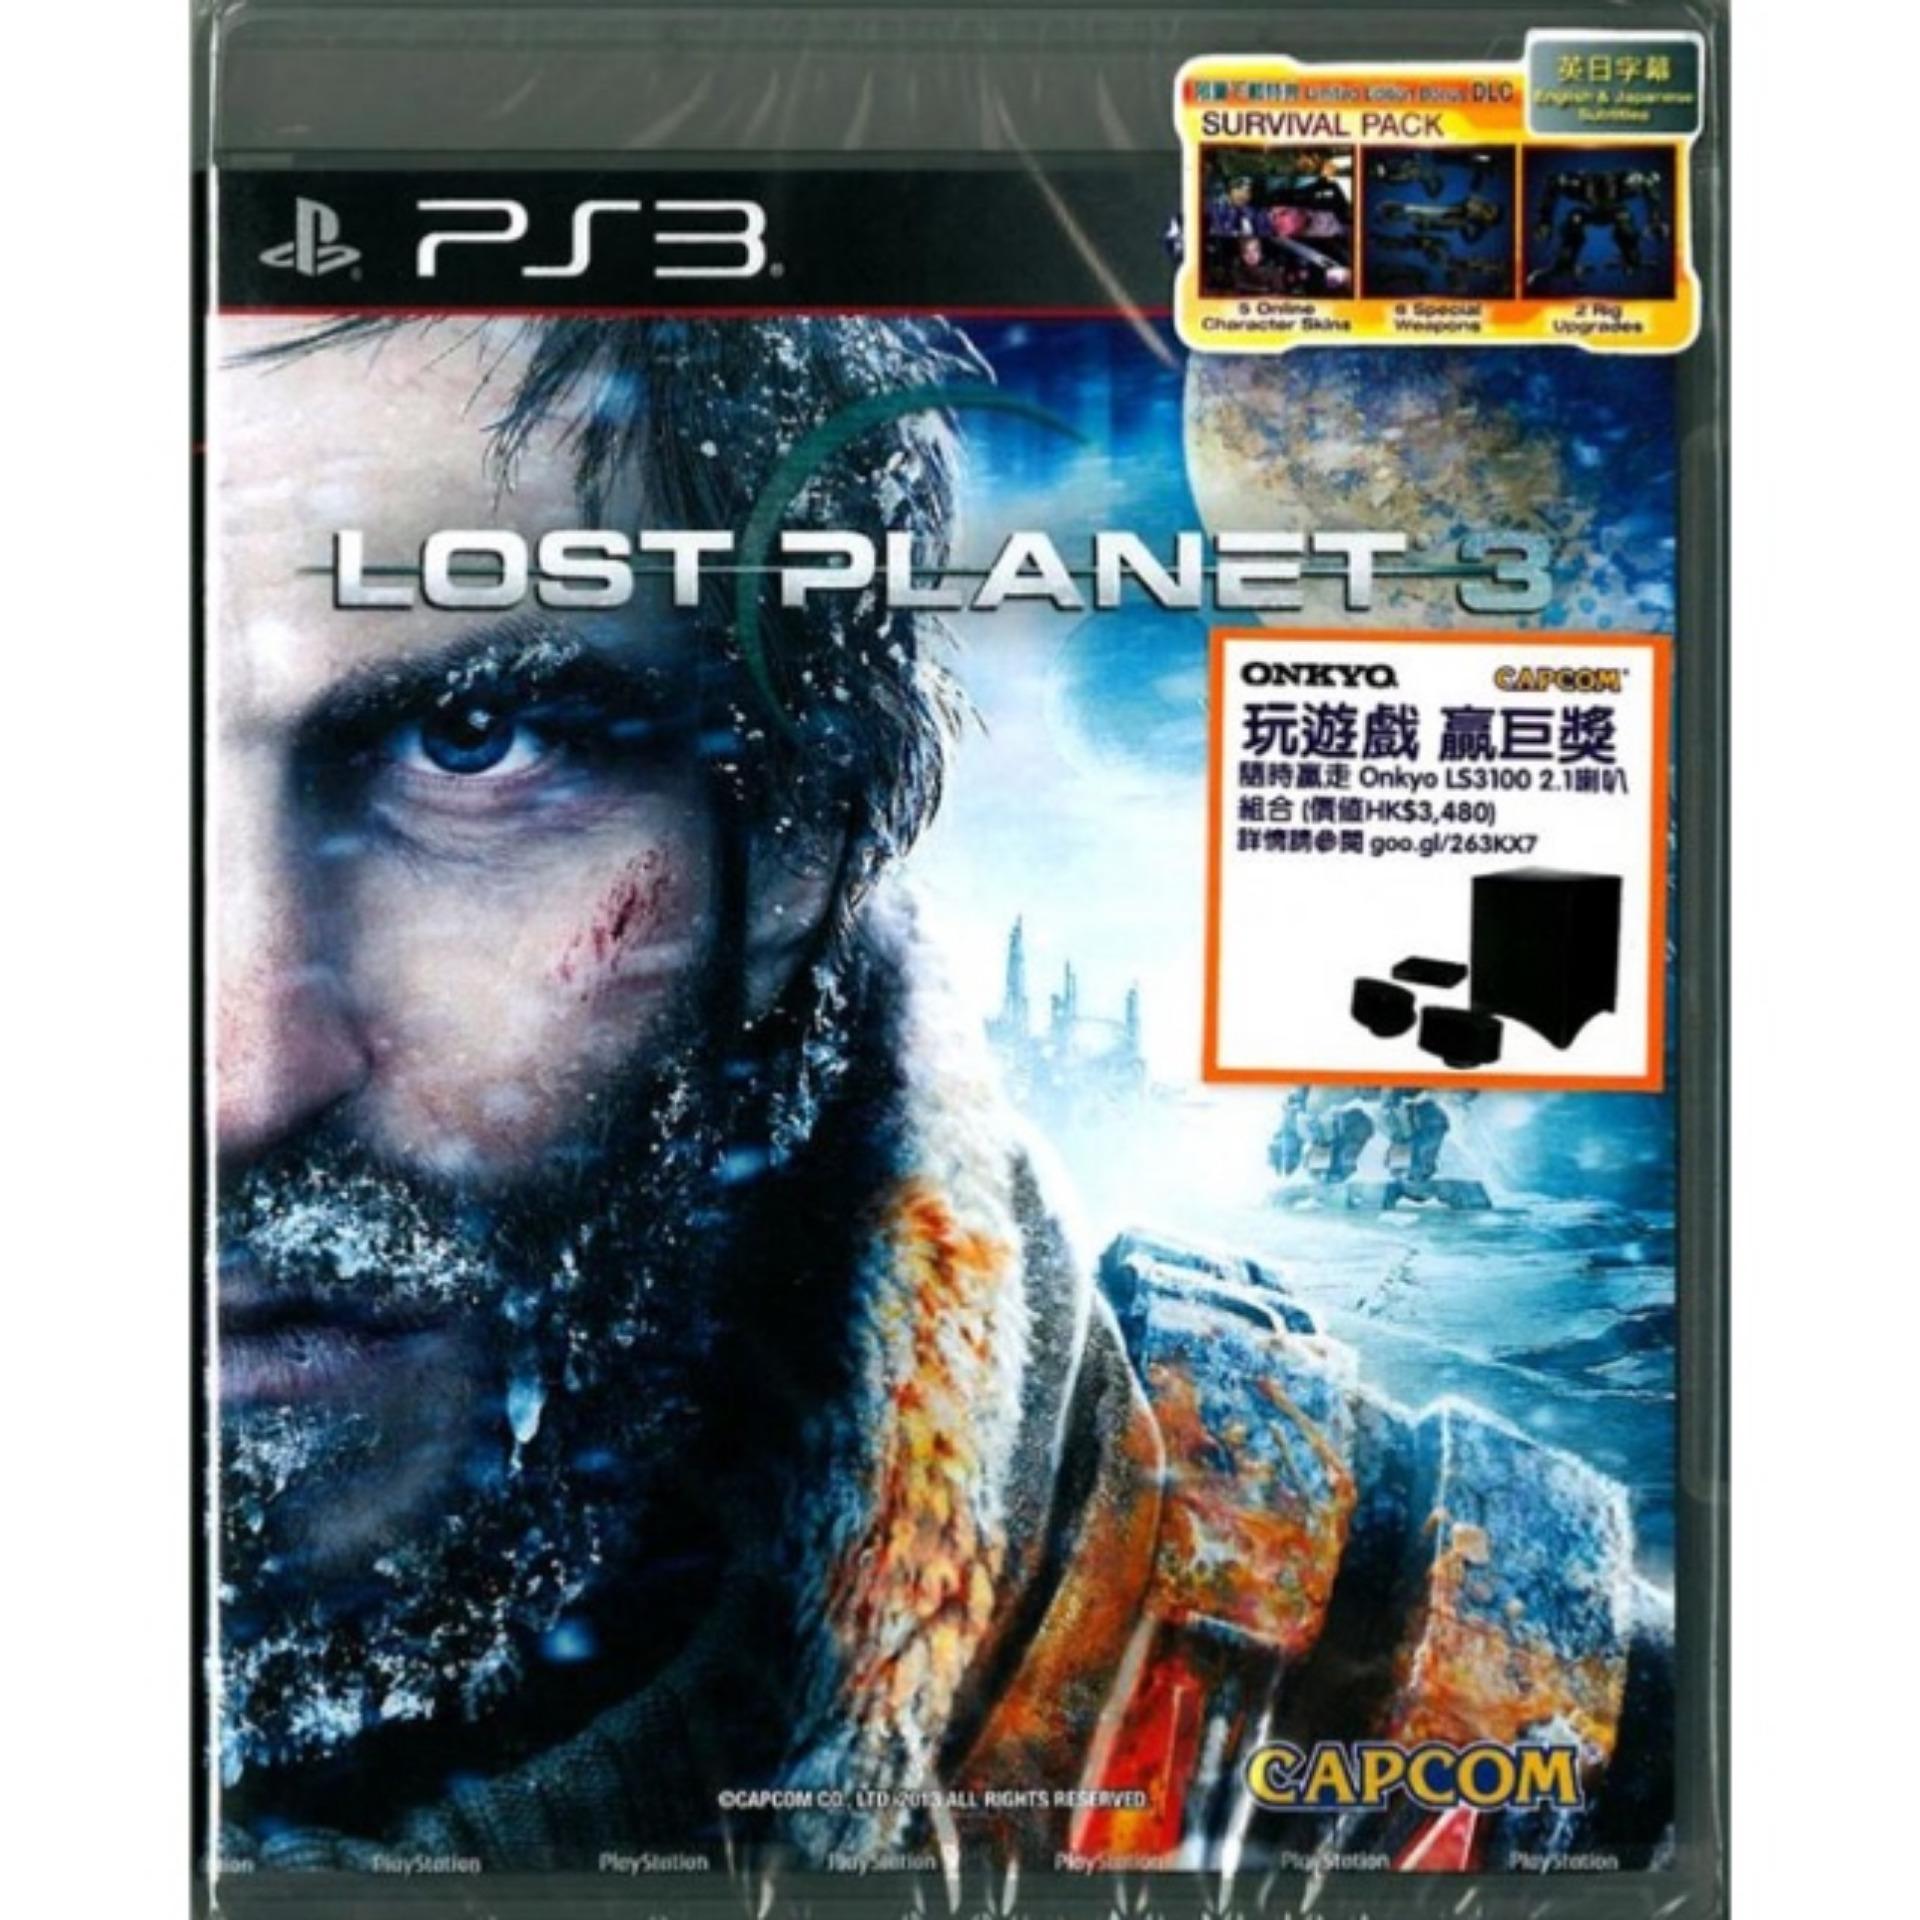 Lost planet ps3